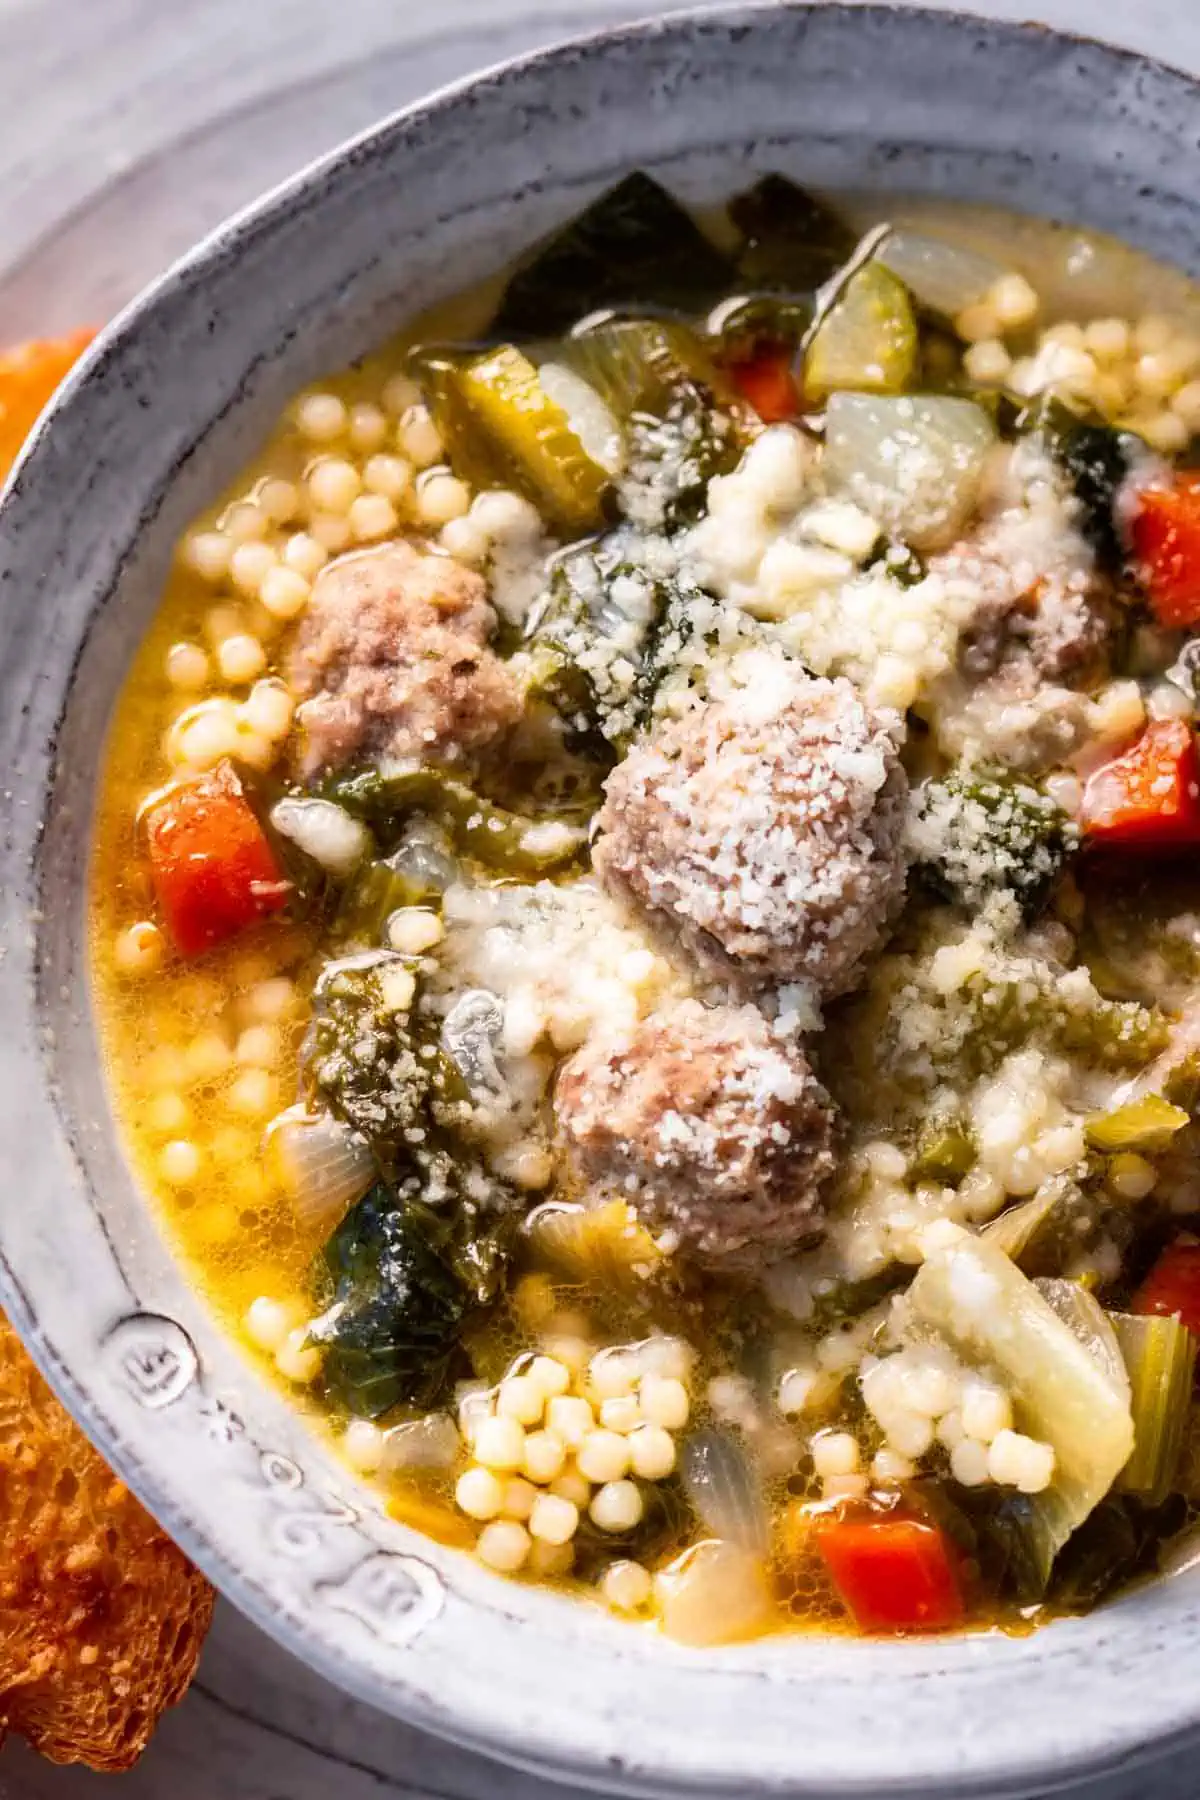 Italian wedding soup in a bowl, sprinkled with cheese.